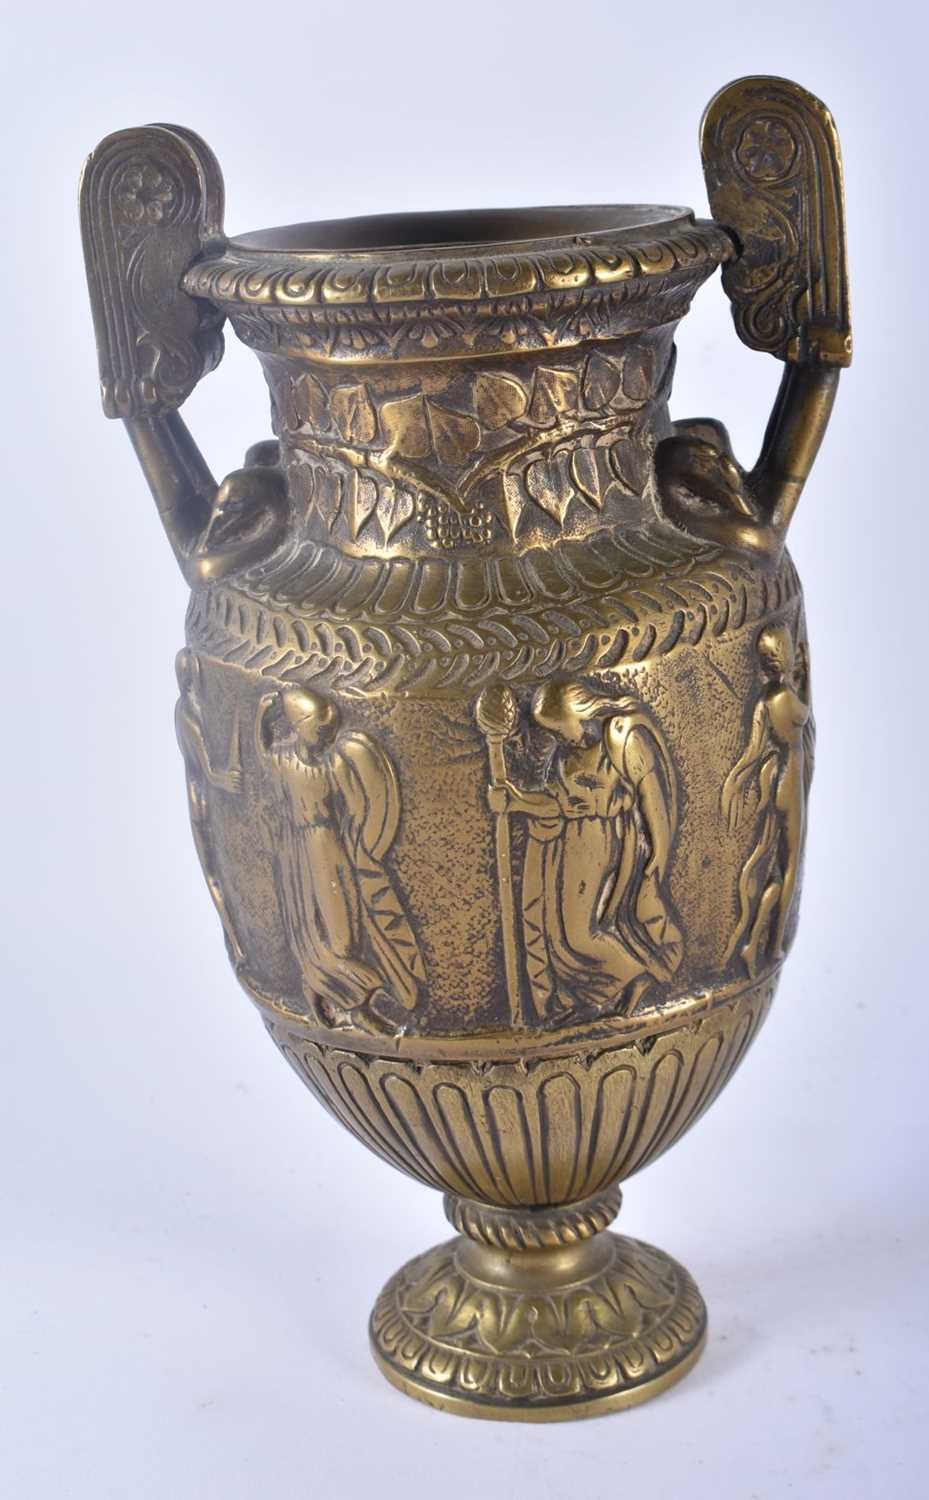 A 19TH CENTURY EUROPEAN GRAND TOUR TWIN HANDLED BRONZE VASE together with a smaller similar - Image 5 of 5